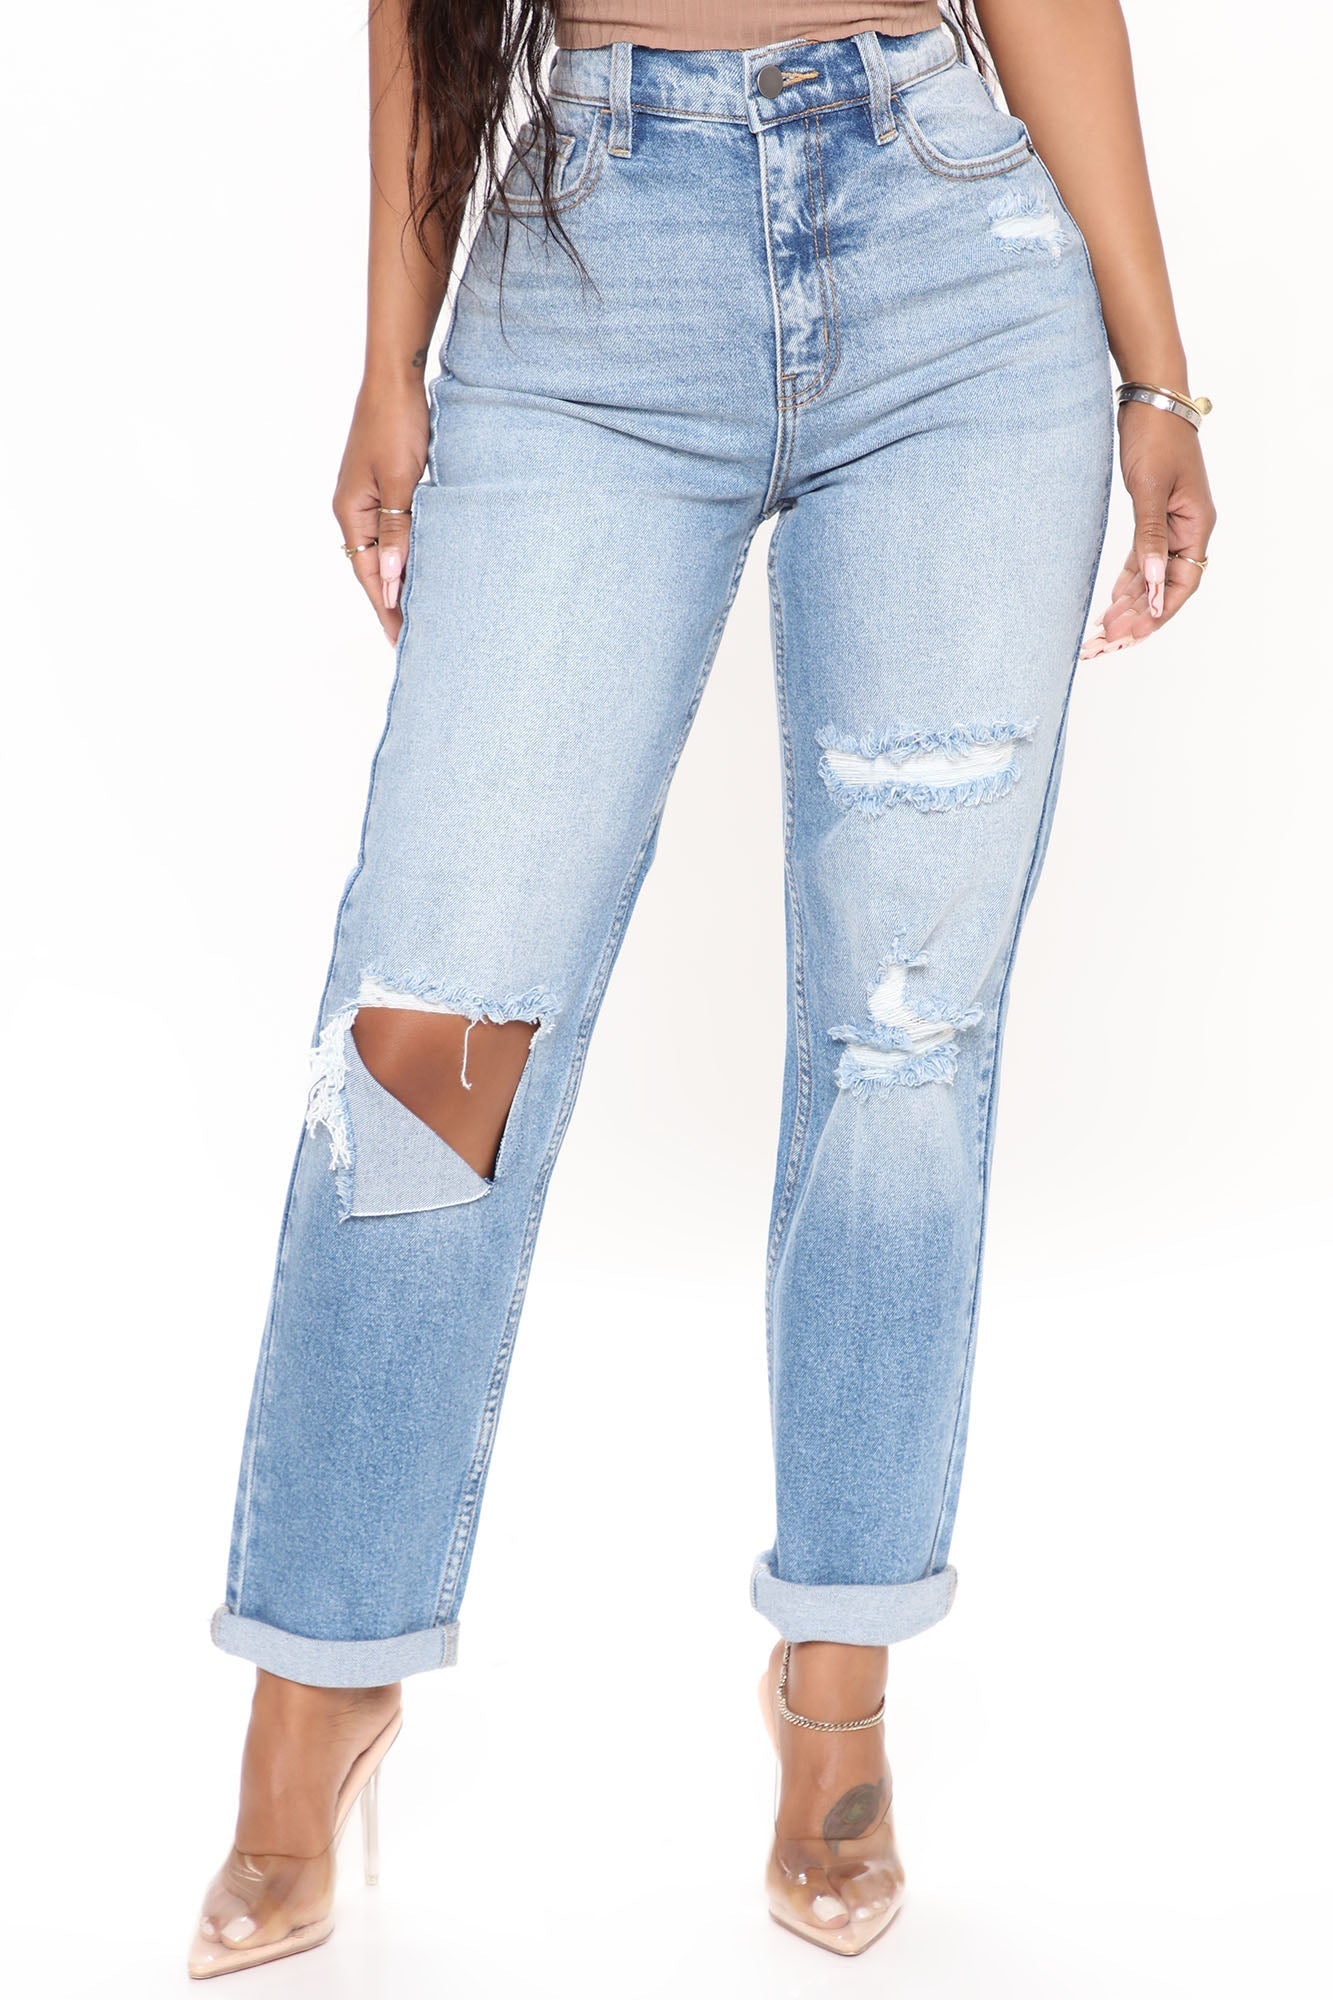 Classic Tapered Ripped Mom Jeans - Medium Blue Wash